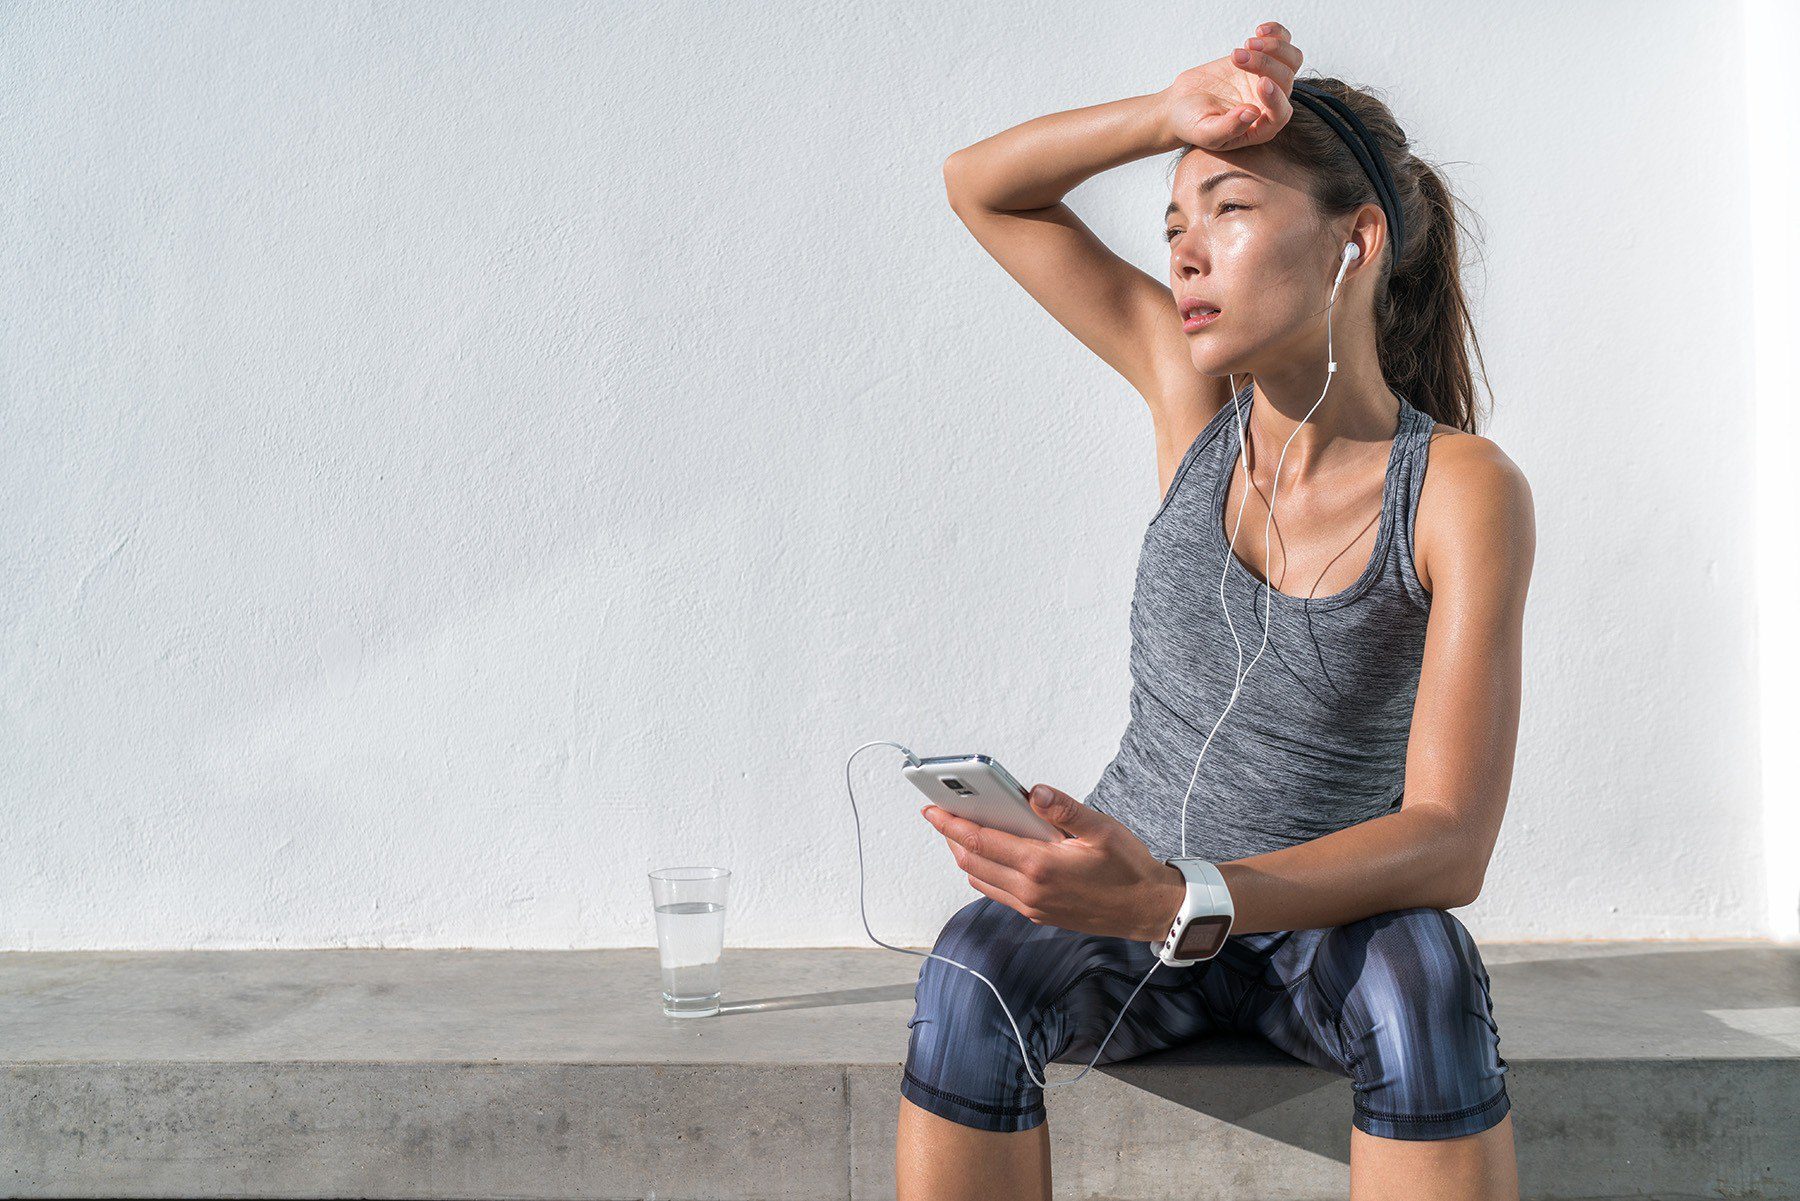 Woman in workout clothing sitting on a bench squinting off into the distance